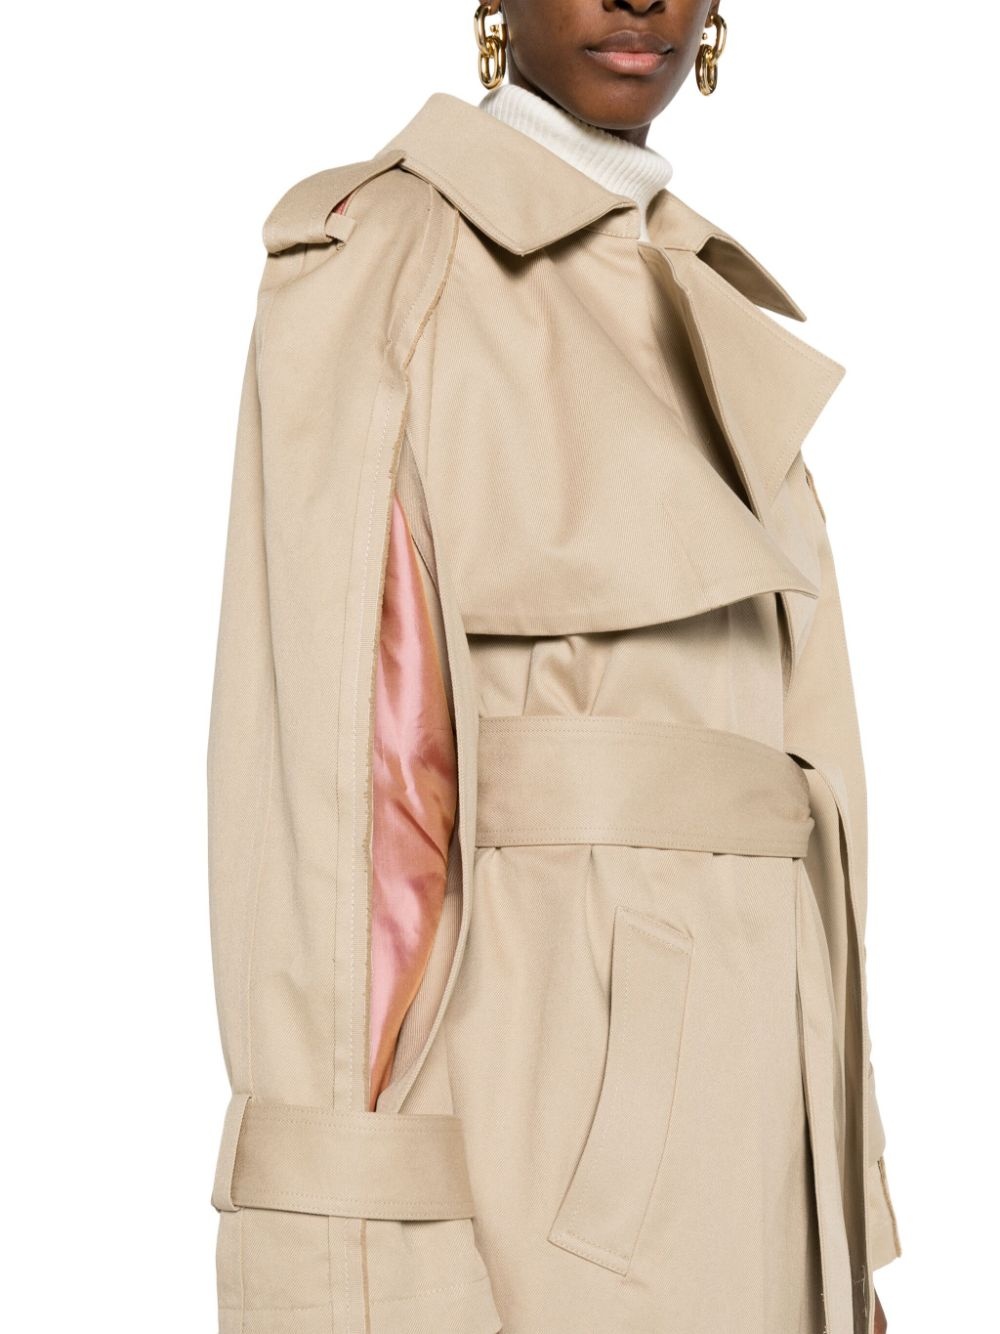 Victoria Beckham pleated trench coat | REVERSIBLE